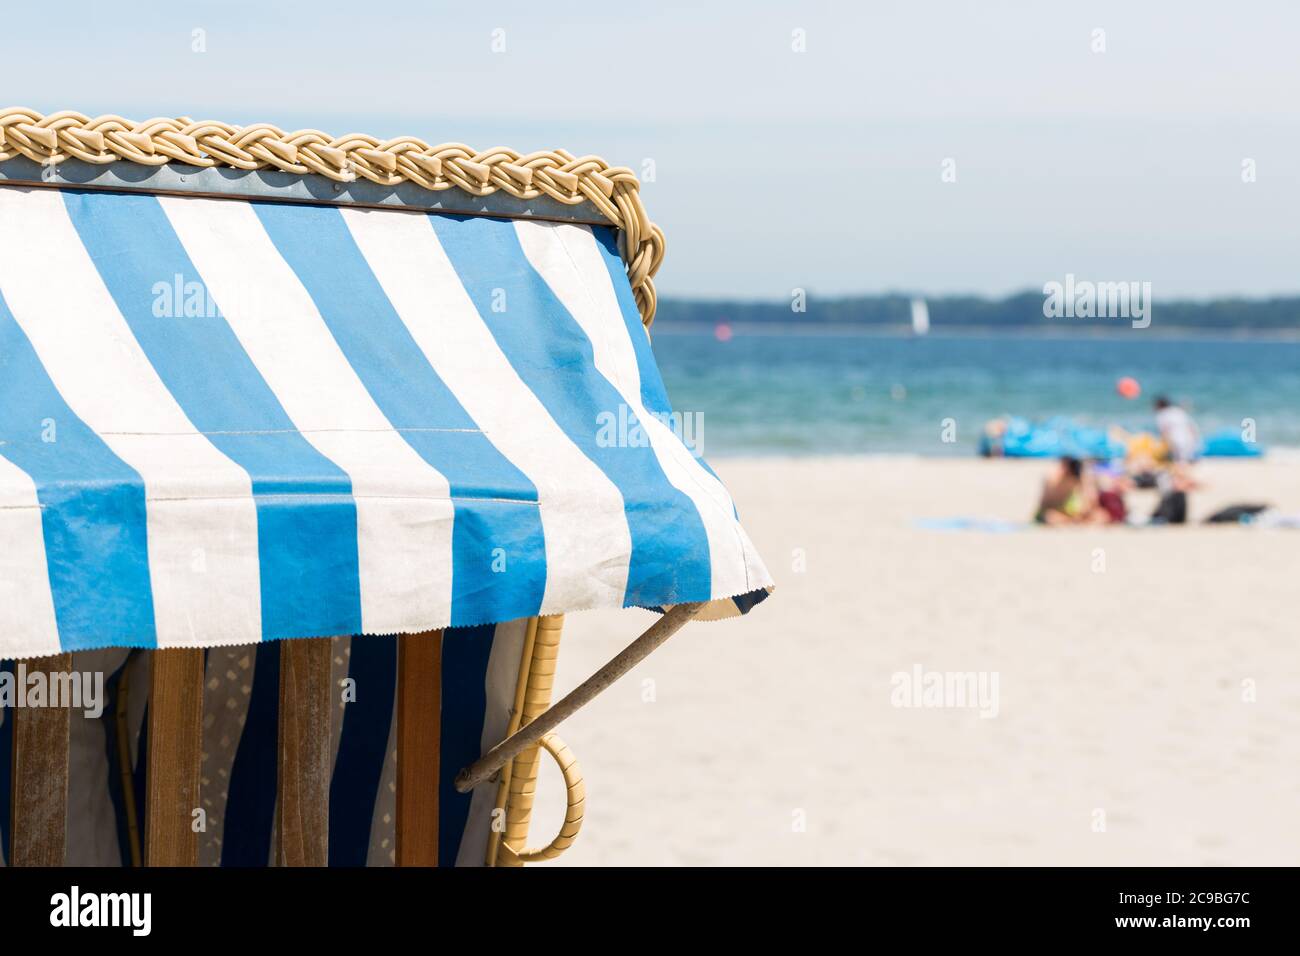 Detail of a Strandkorb (wicker beach chair). Beach, the Baltic Sea and tourists in the background. Stock Photo